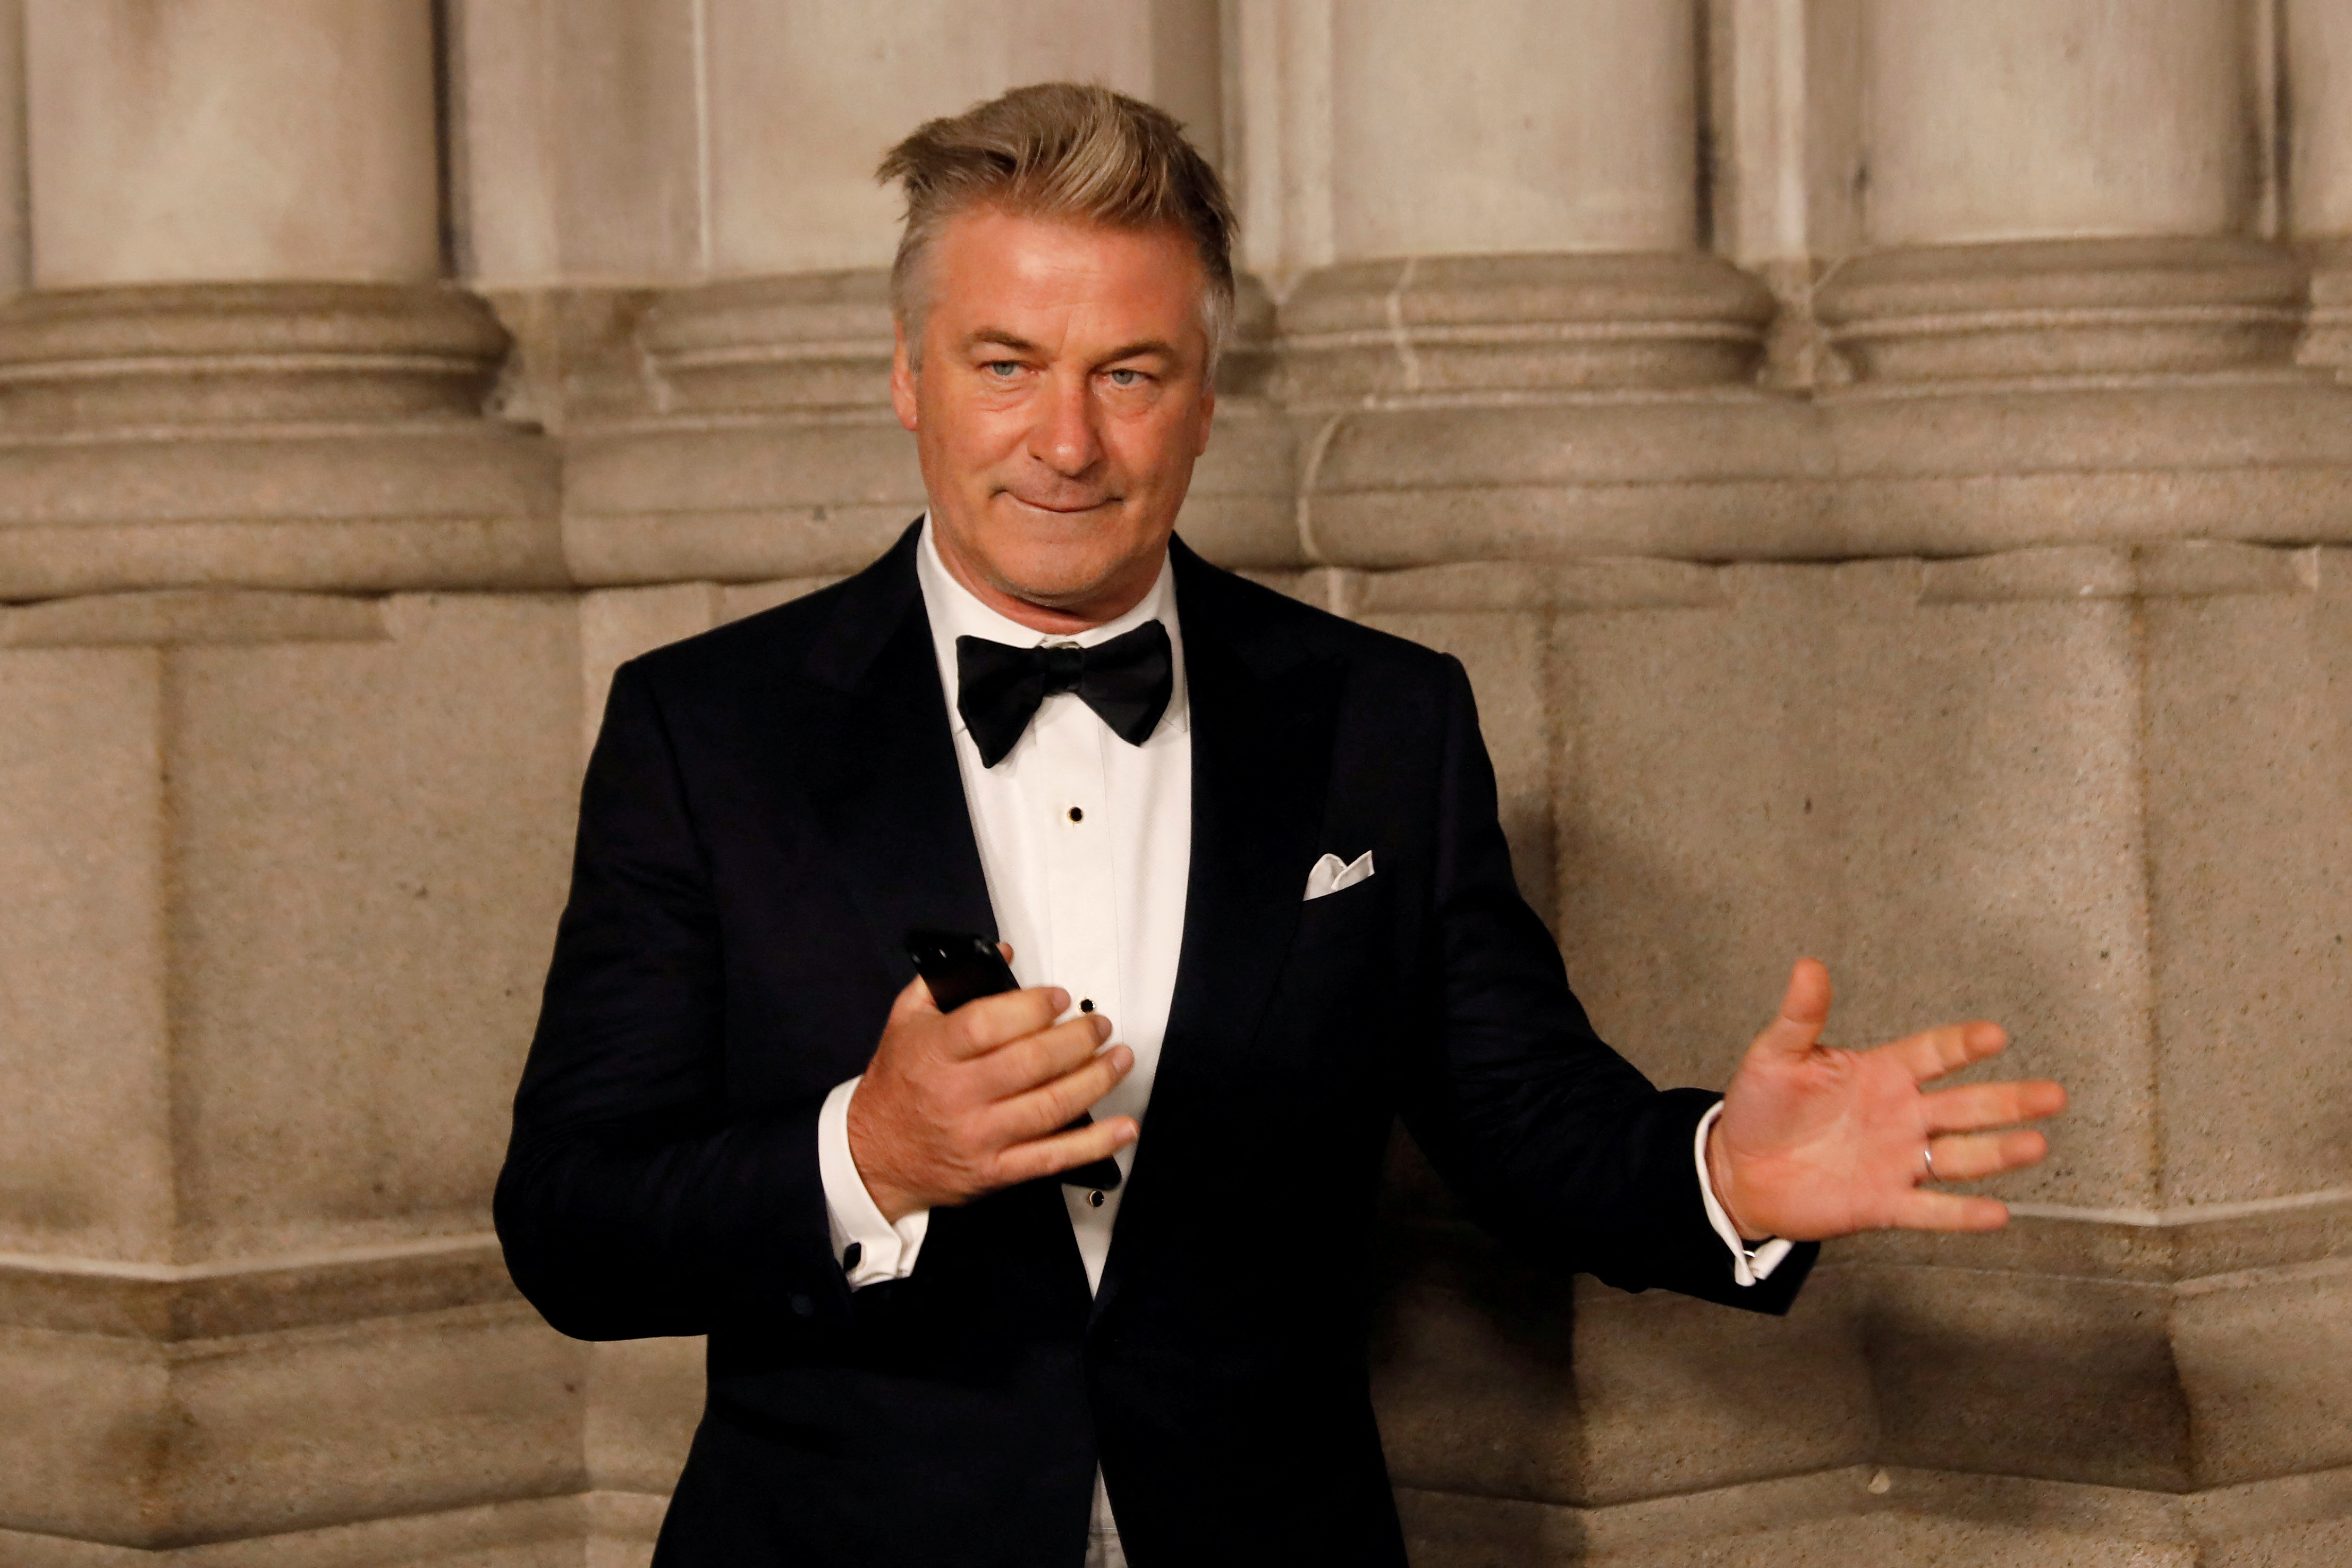 FILE PHOTO: Actor Alec Baldwin gestures before walking on the red carpet during the commemoration of the Elton John AIDS Foundation 25th year fall gala at the Cathedral of St. John the Divine in New York City, in New York, U.S. November 7, 2017. REUTERS/Shannon Stapleton/File Photo